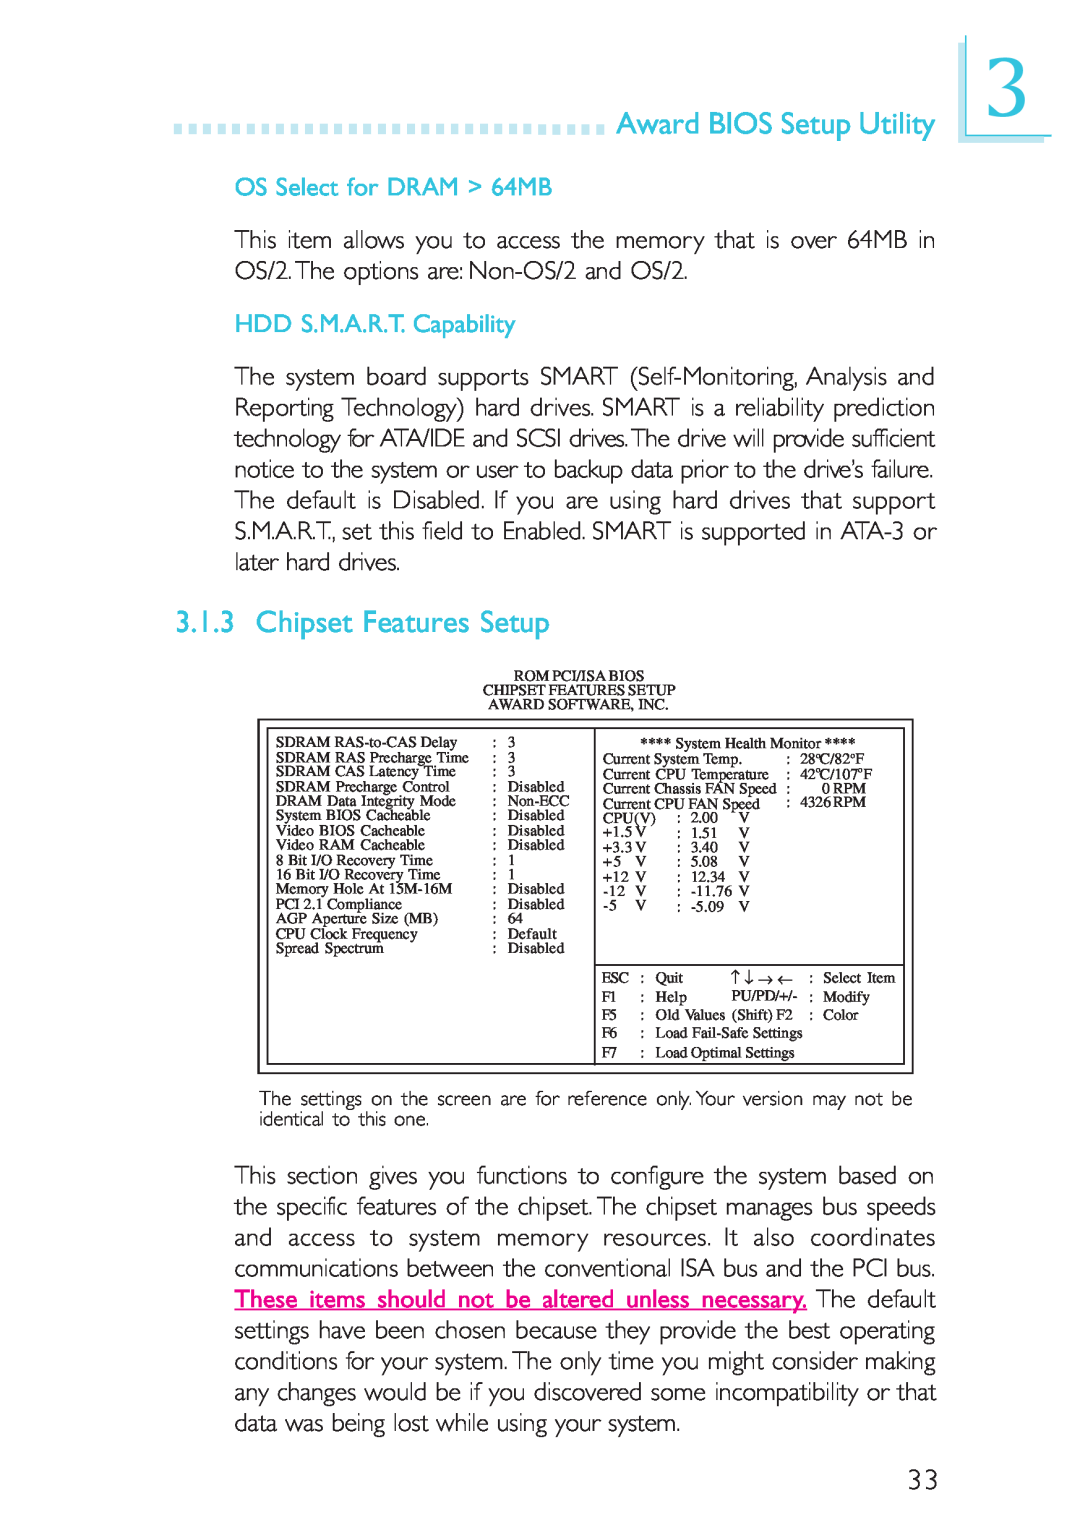 Intel CB60-ZX manual Chipset Features Setup, OS Select for DRAM 64MB, HDD S.M.A.R.T. Capability, Award BIOS Setup Utility 